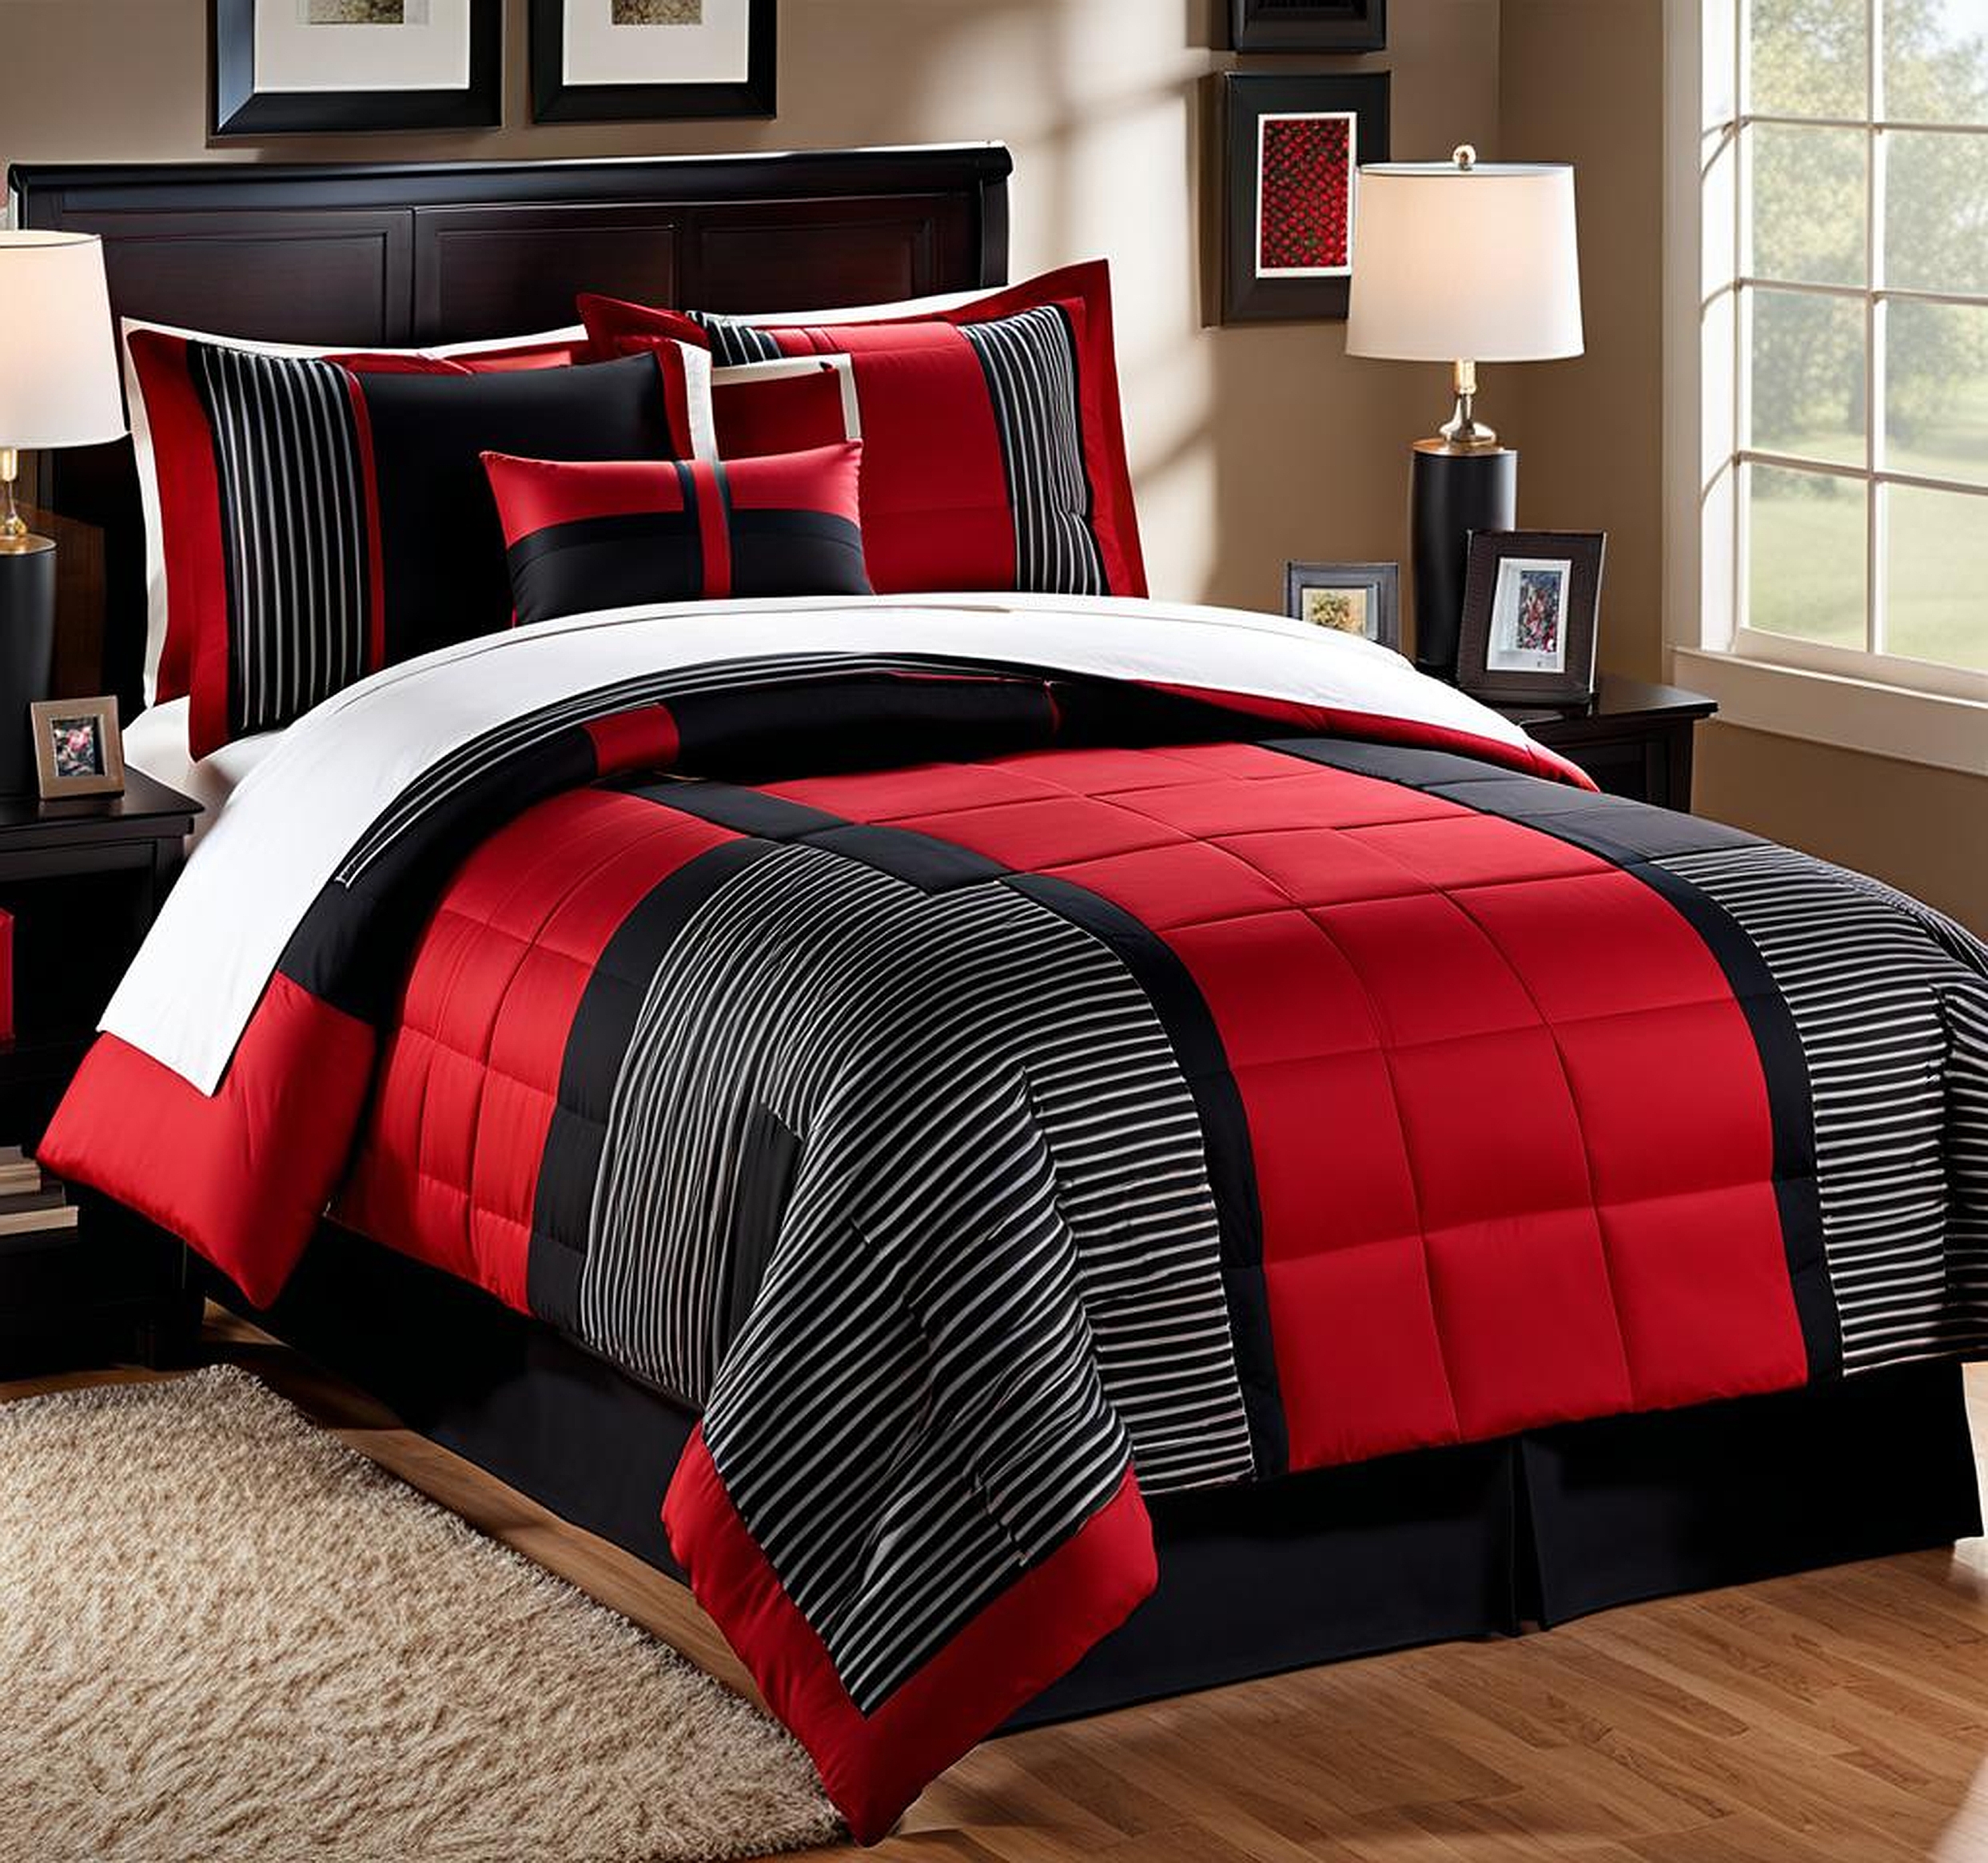 Red and Black Twin Comforter Set for a Bold Bedding Design